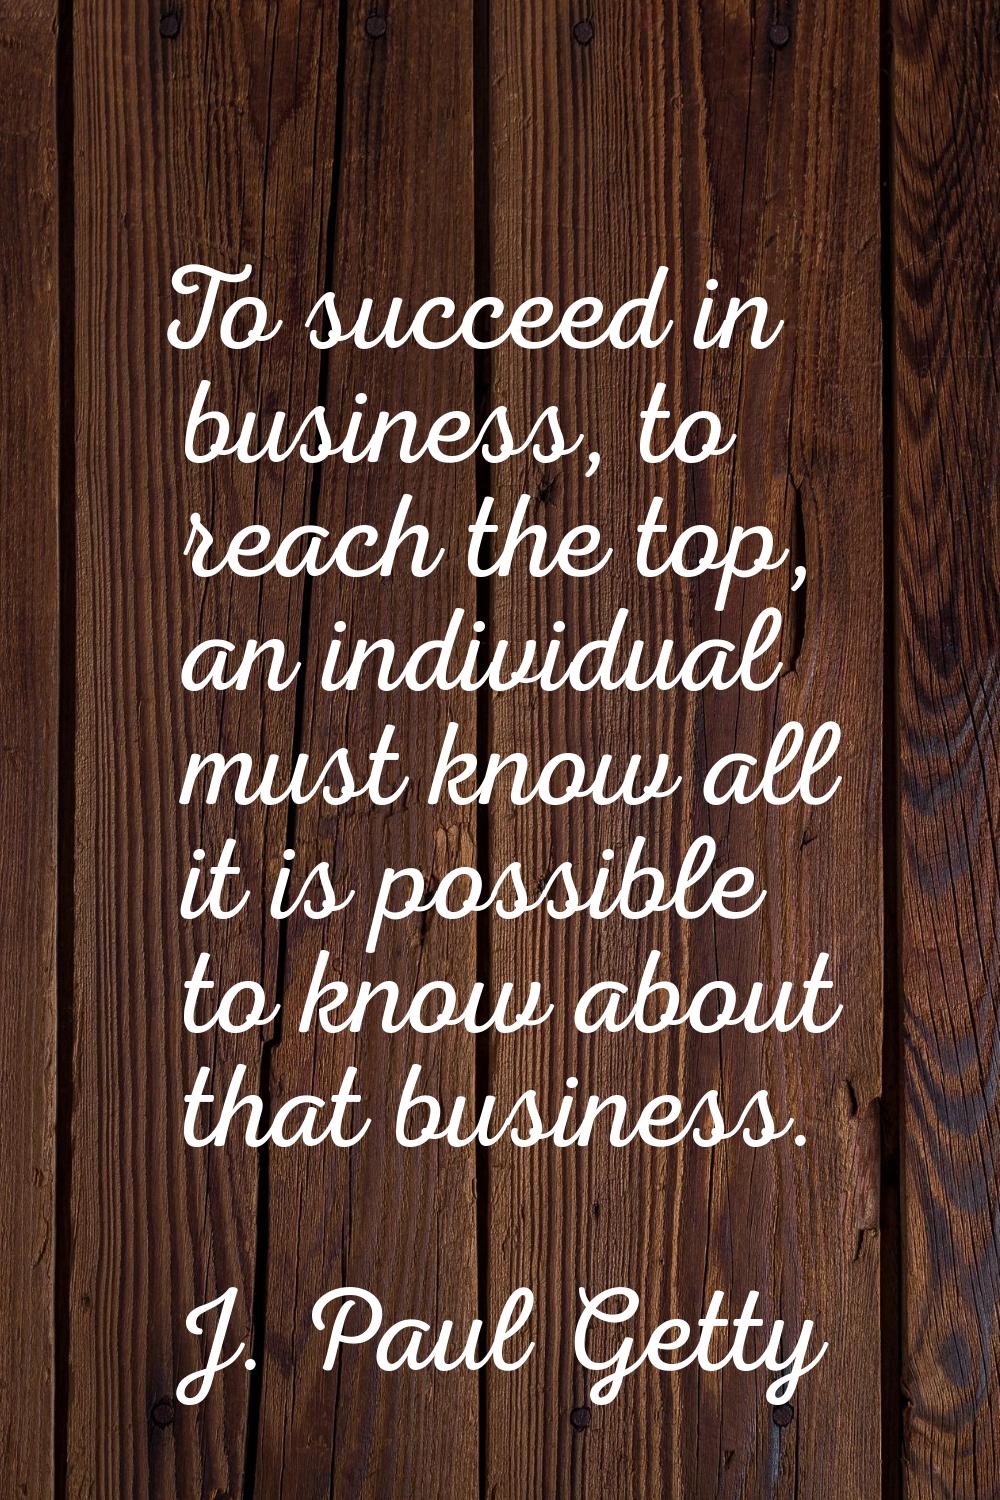 To succeed in business, to reach the top, an individual must know all it is possible to know about 